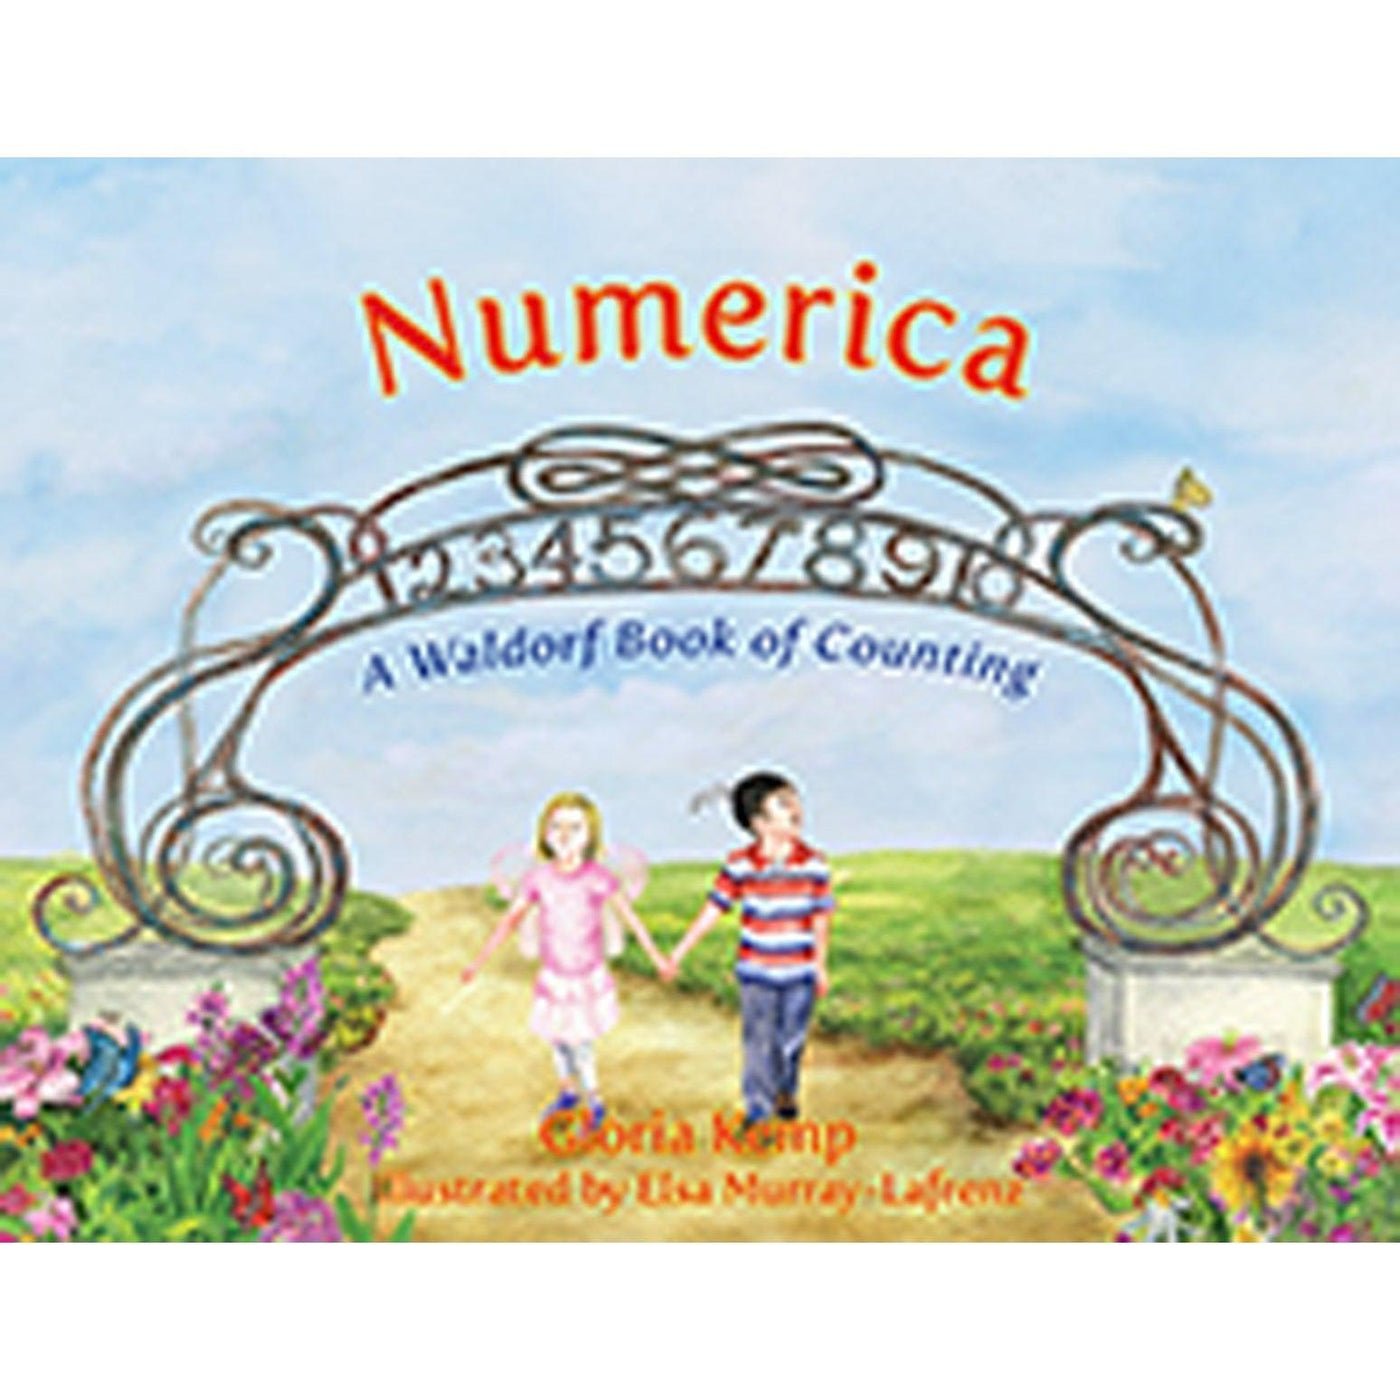 Numerica: A Waldorf Book Of Counting